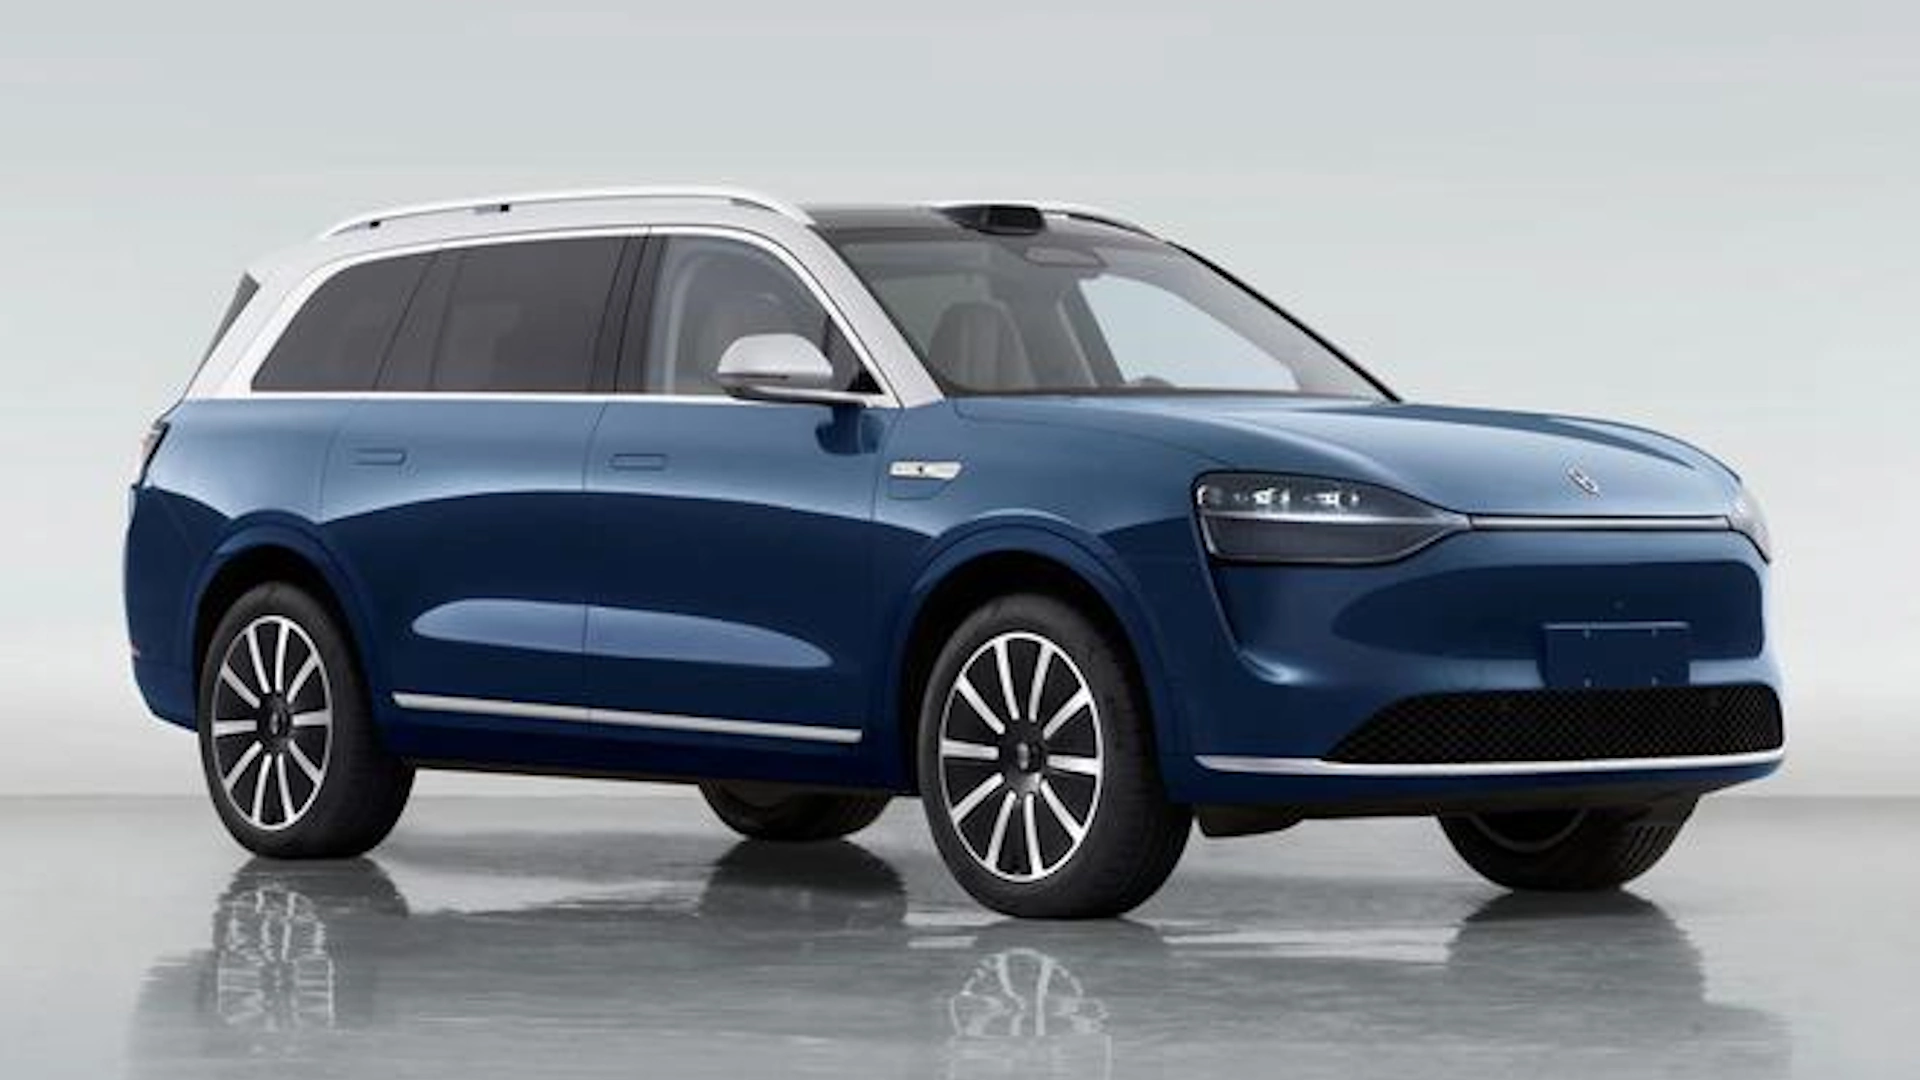 The new SUV Aito M9 debuted at the auto show in China